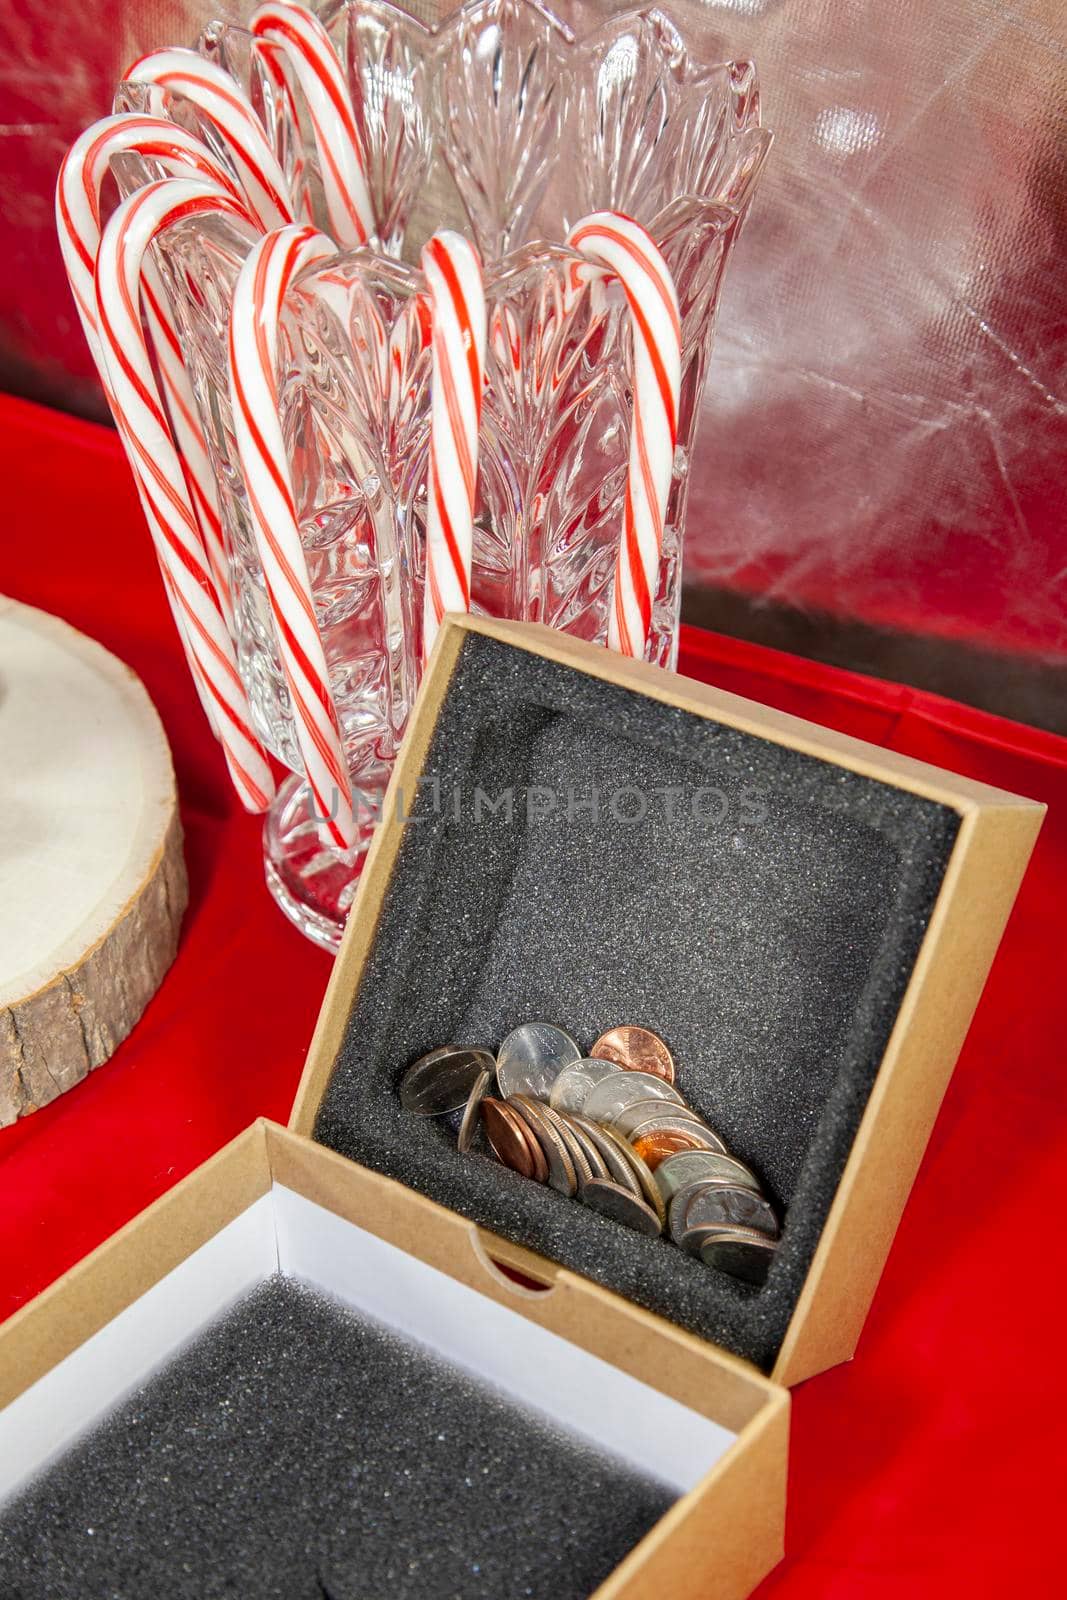 Empty, unwrapped gift box filled with pennies, nickels, dimes, quarters, and a dollar coin, on a red table top with candy canes in the background